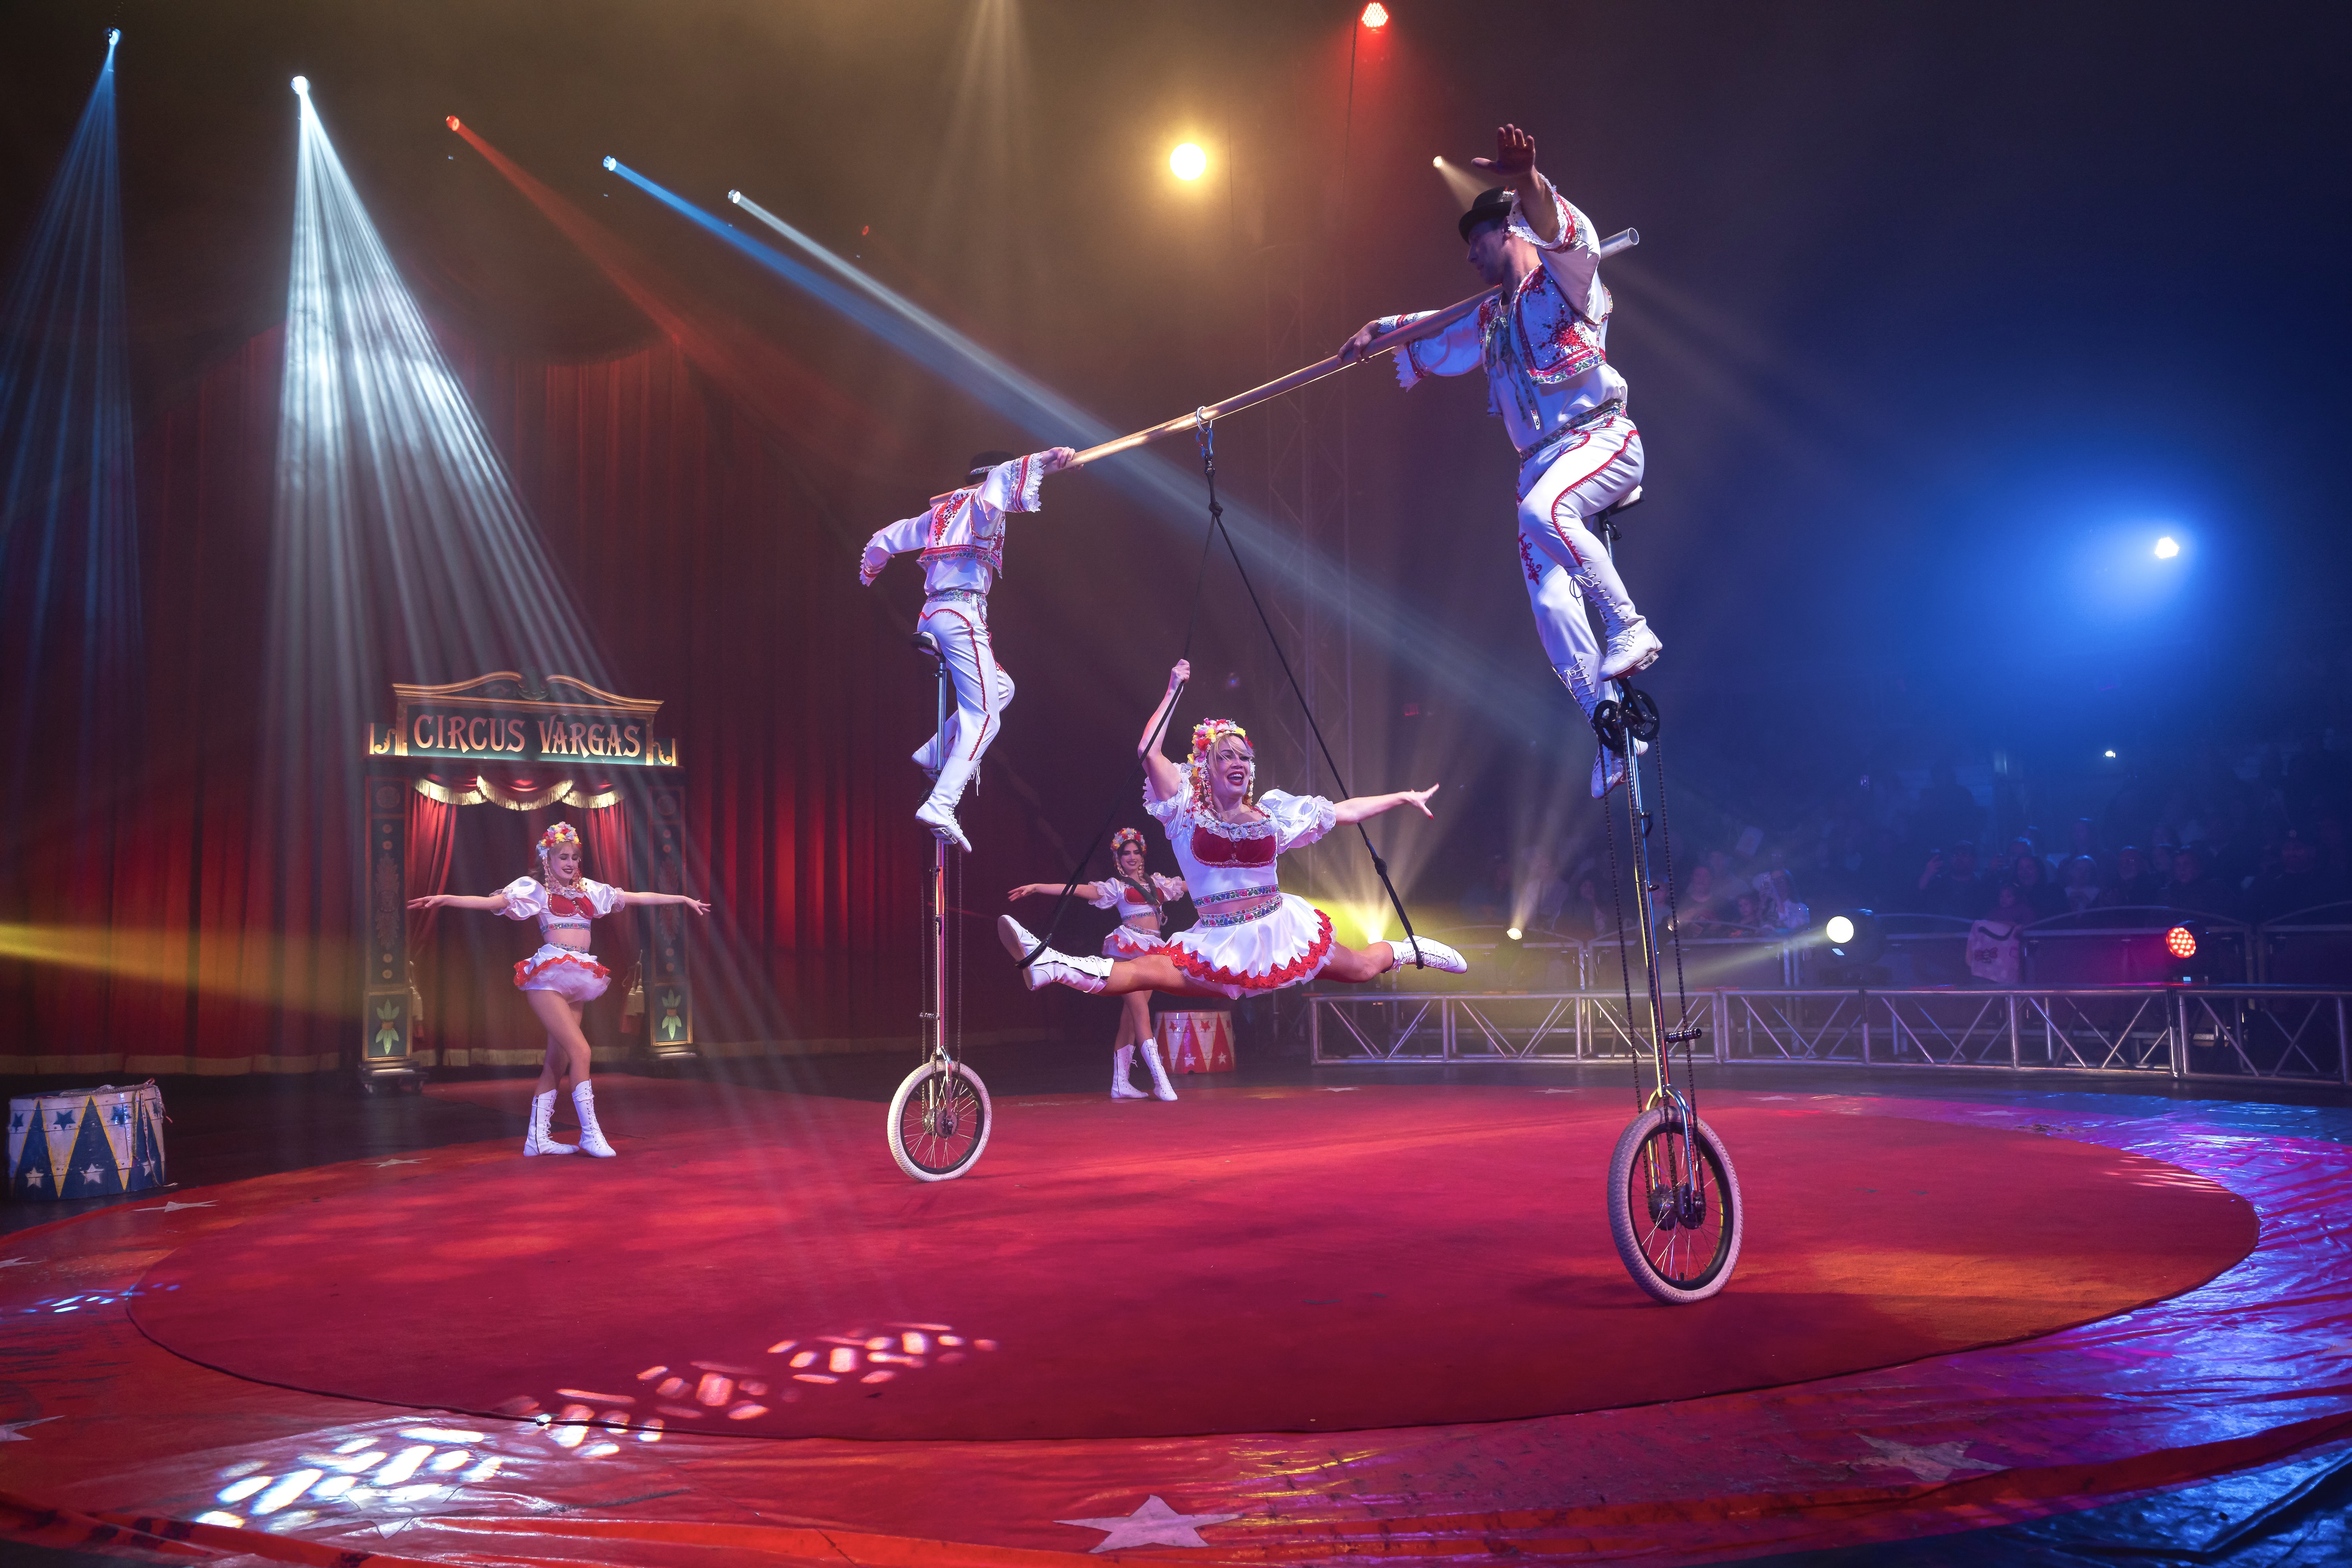 two men on a unicycle holding onto a woman. There are two other women watching in colorful costumes.